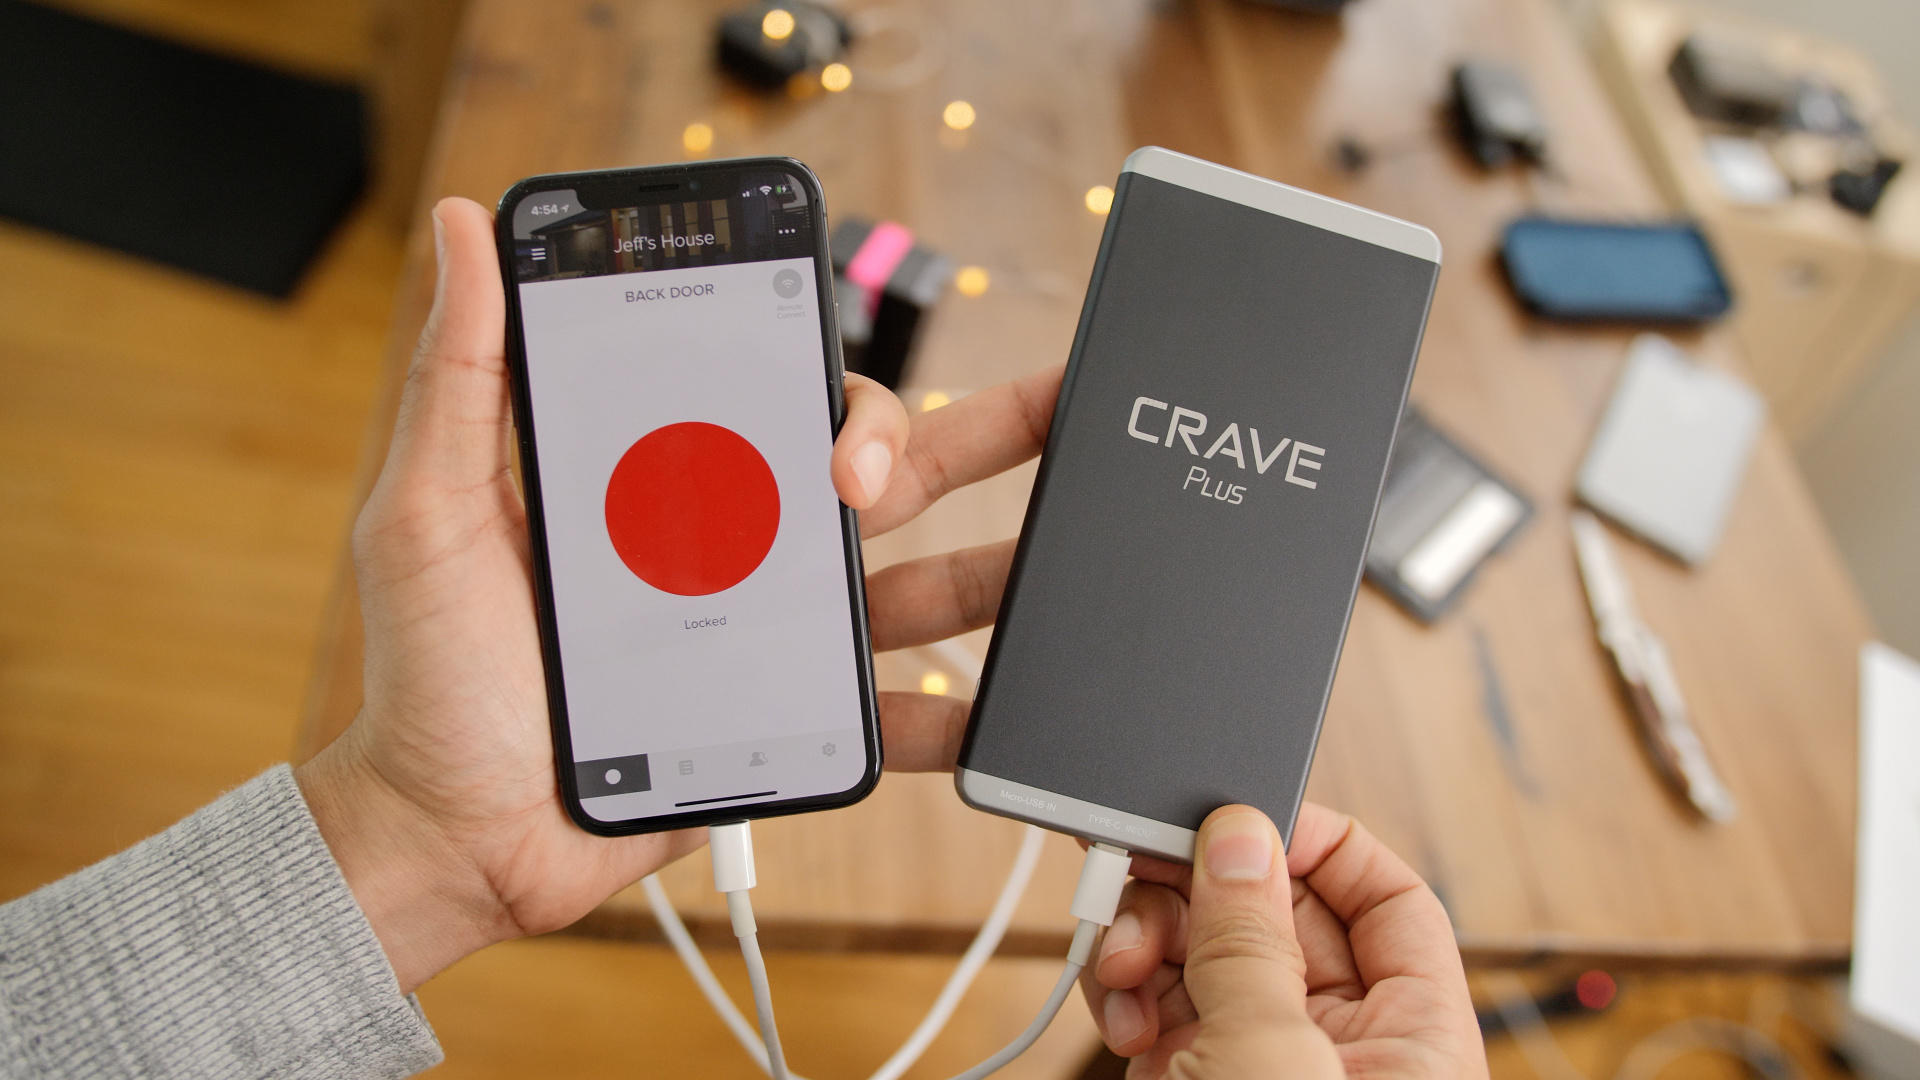 Hands On W The Iphone Size Crave Plus 10 000 Mah Portable Charger 40 Off Deal Video 9to5mac